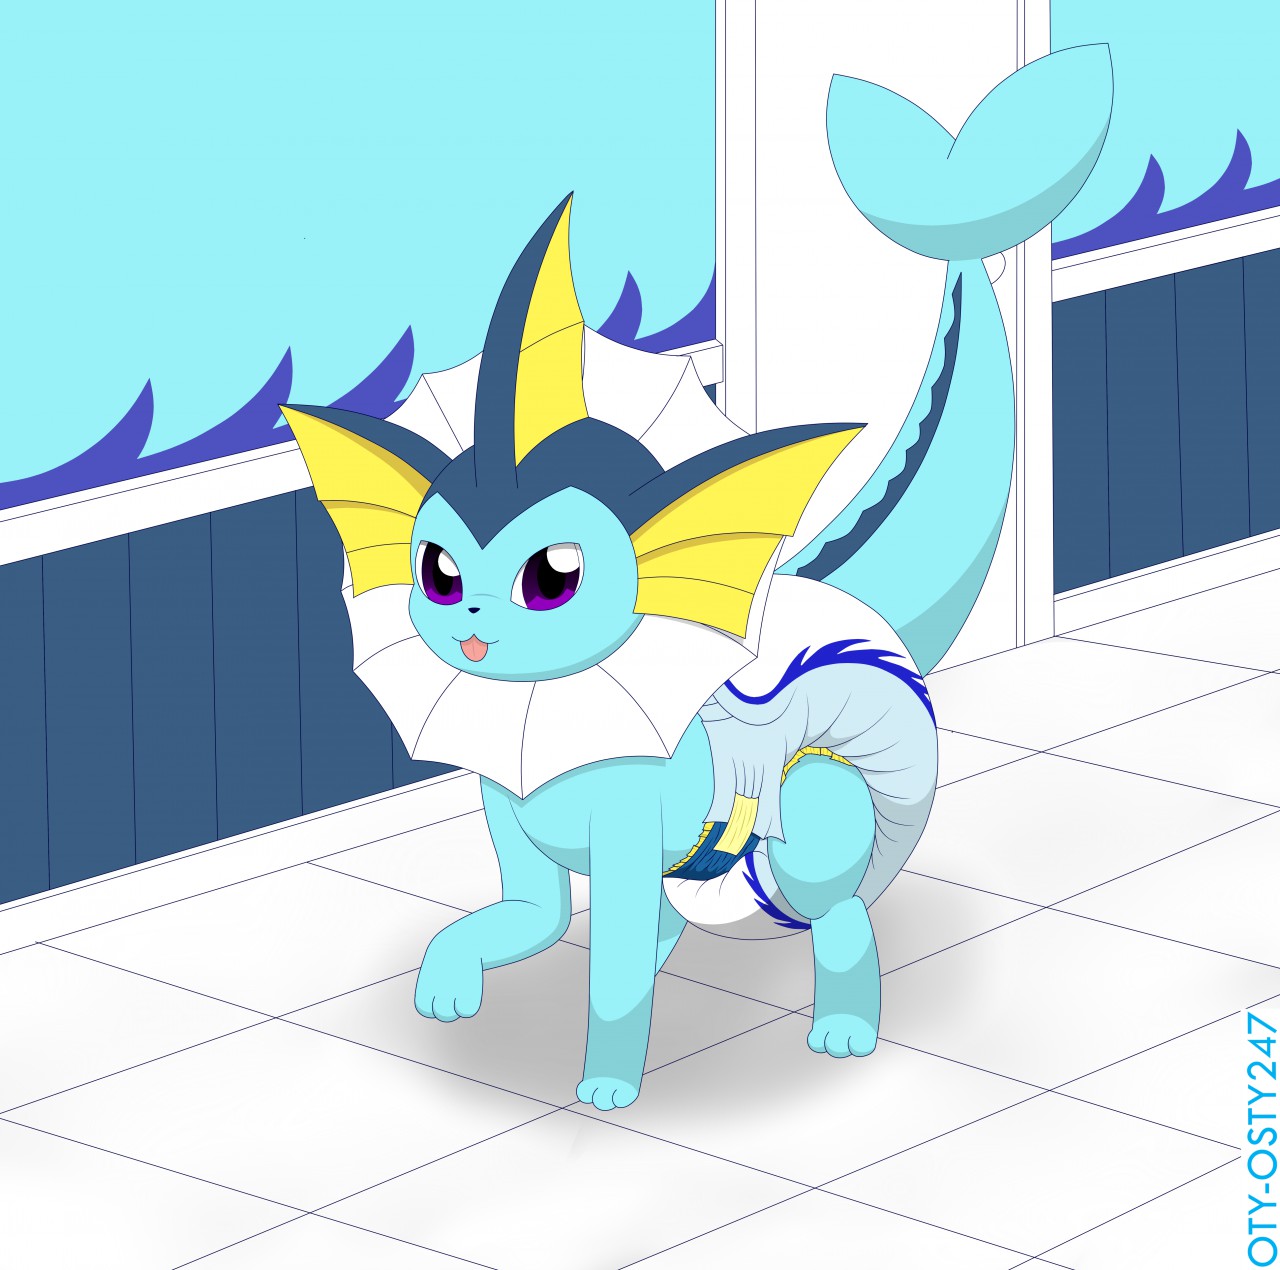 Ain't that a cute [little Vaporeon in that picture there with I an